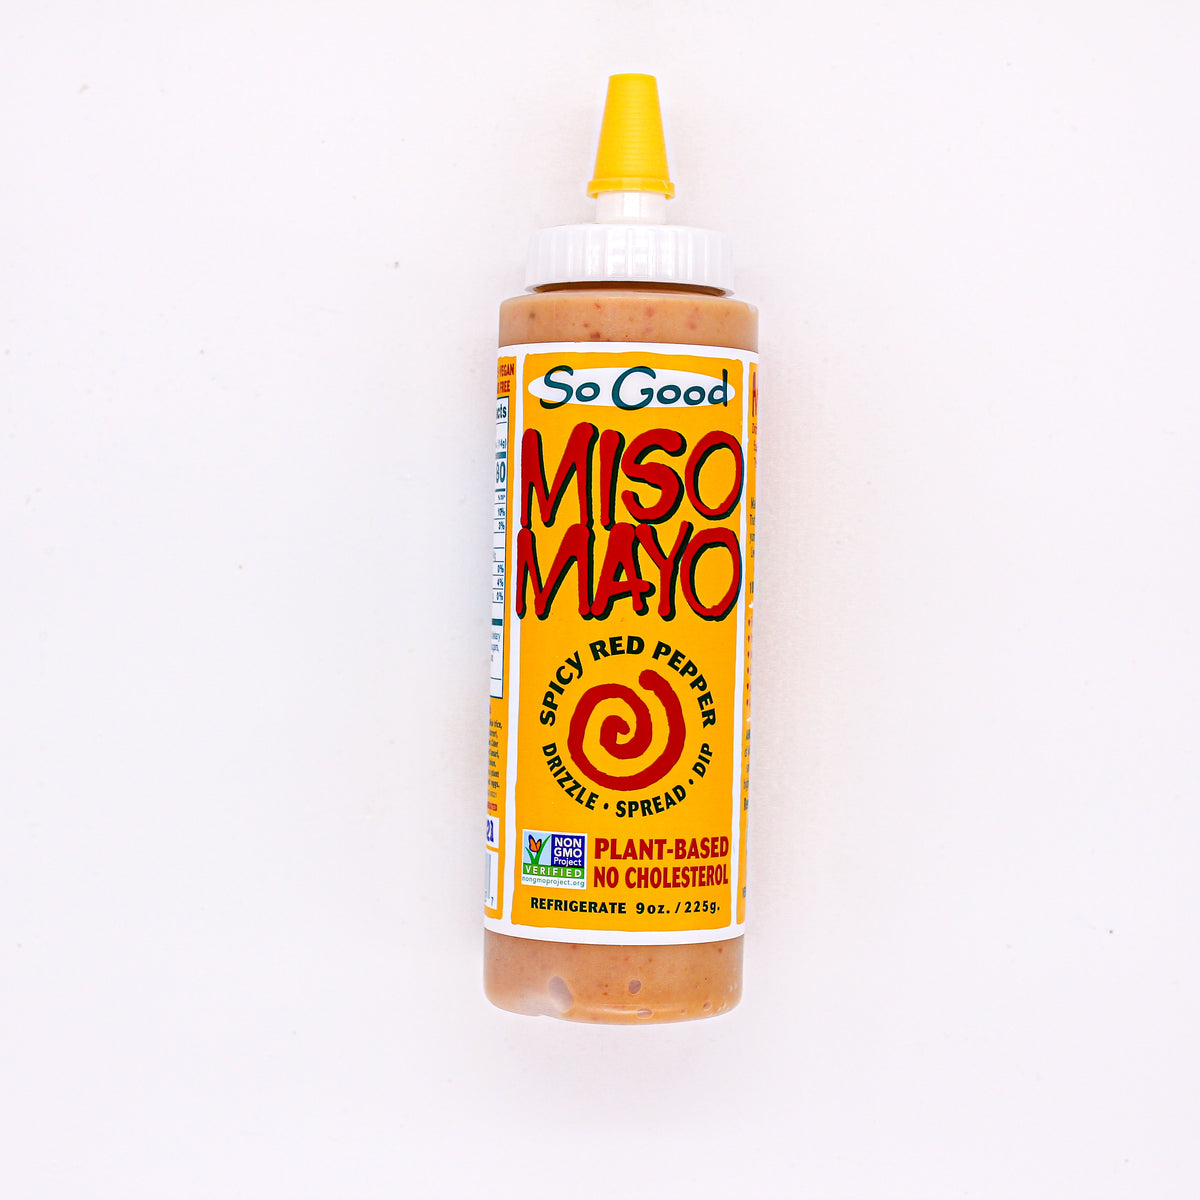 Miso Mayo Red Pepper